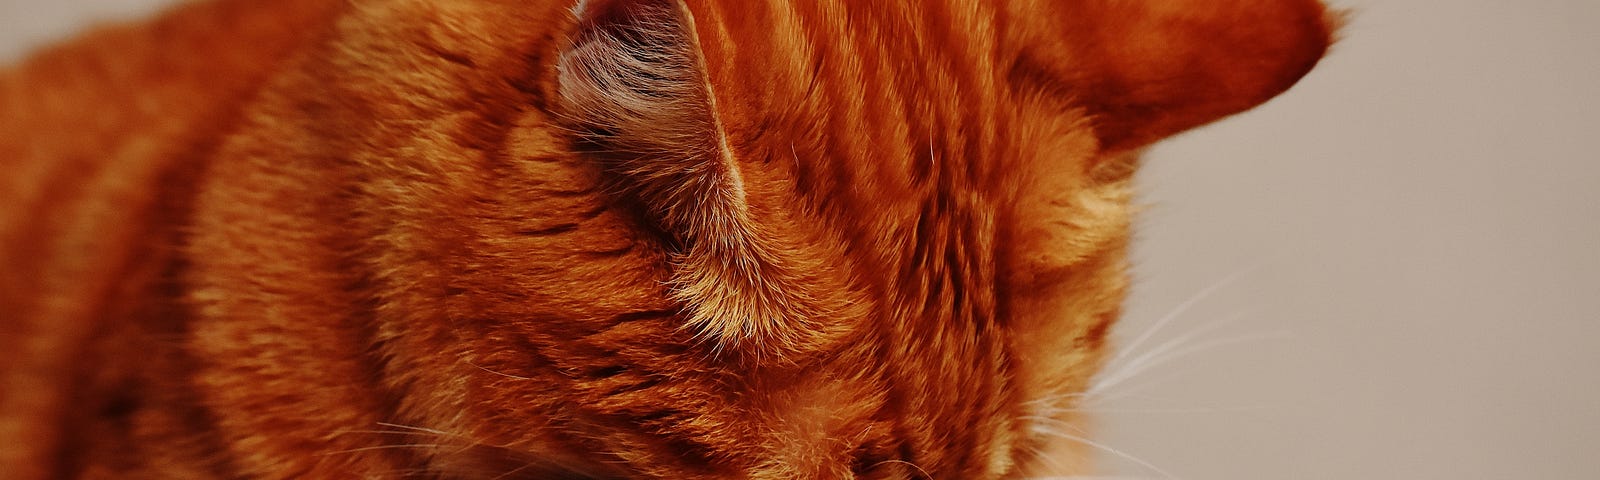 An orange tabby cat hiding it’s face with its paws.